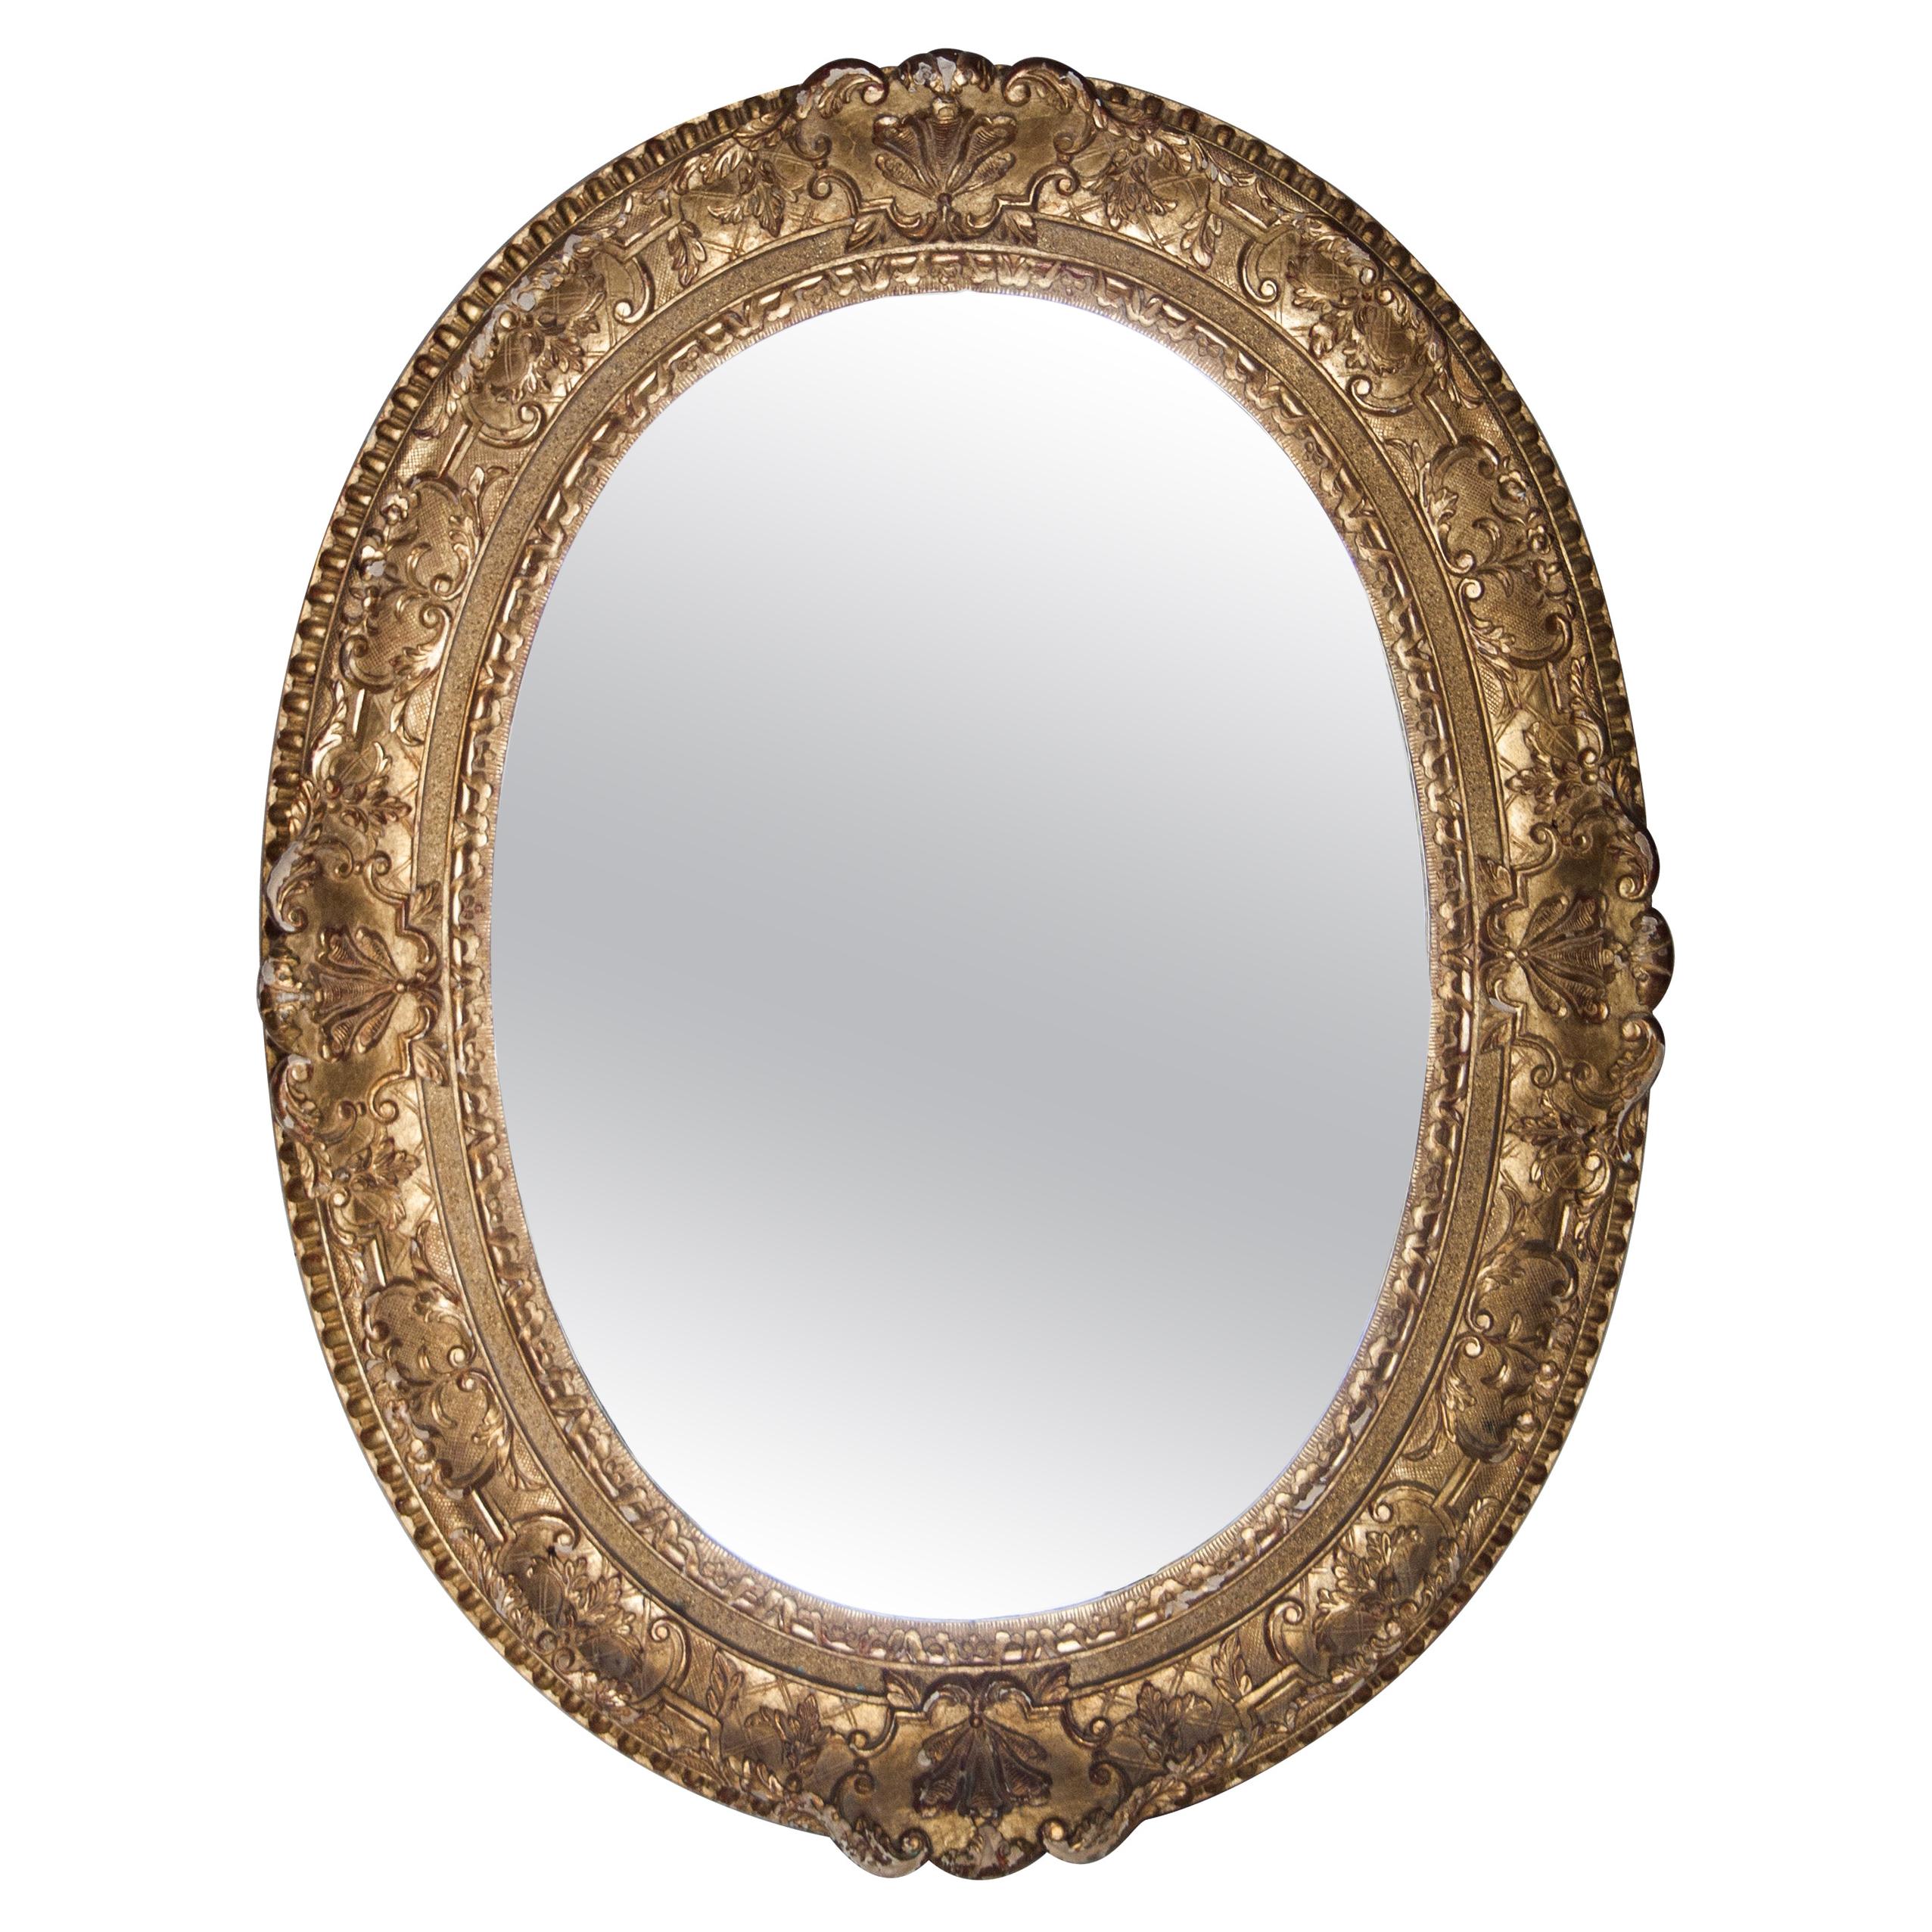 Neoclassical Empire Oval Gold Hand Carved Wooden Mirror, Spain, 1970